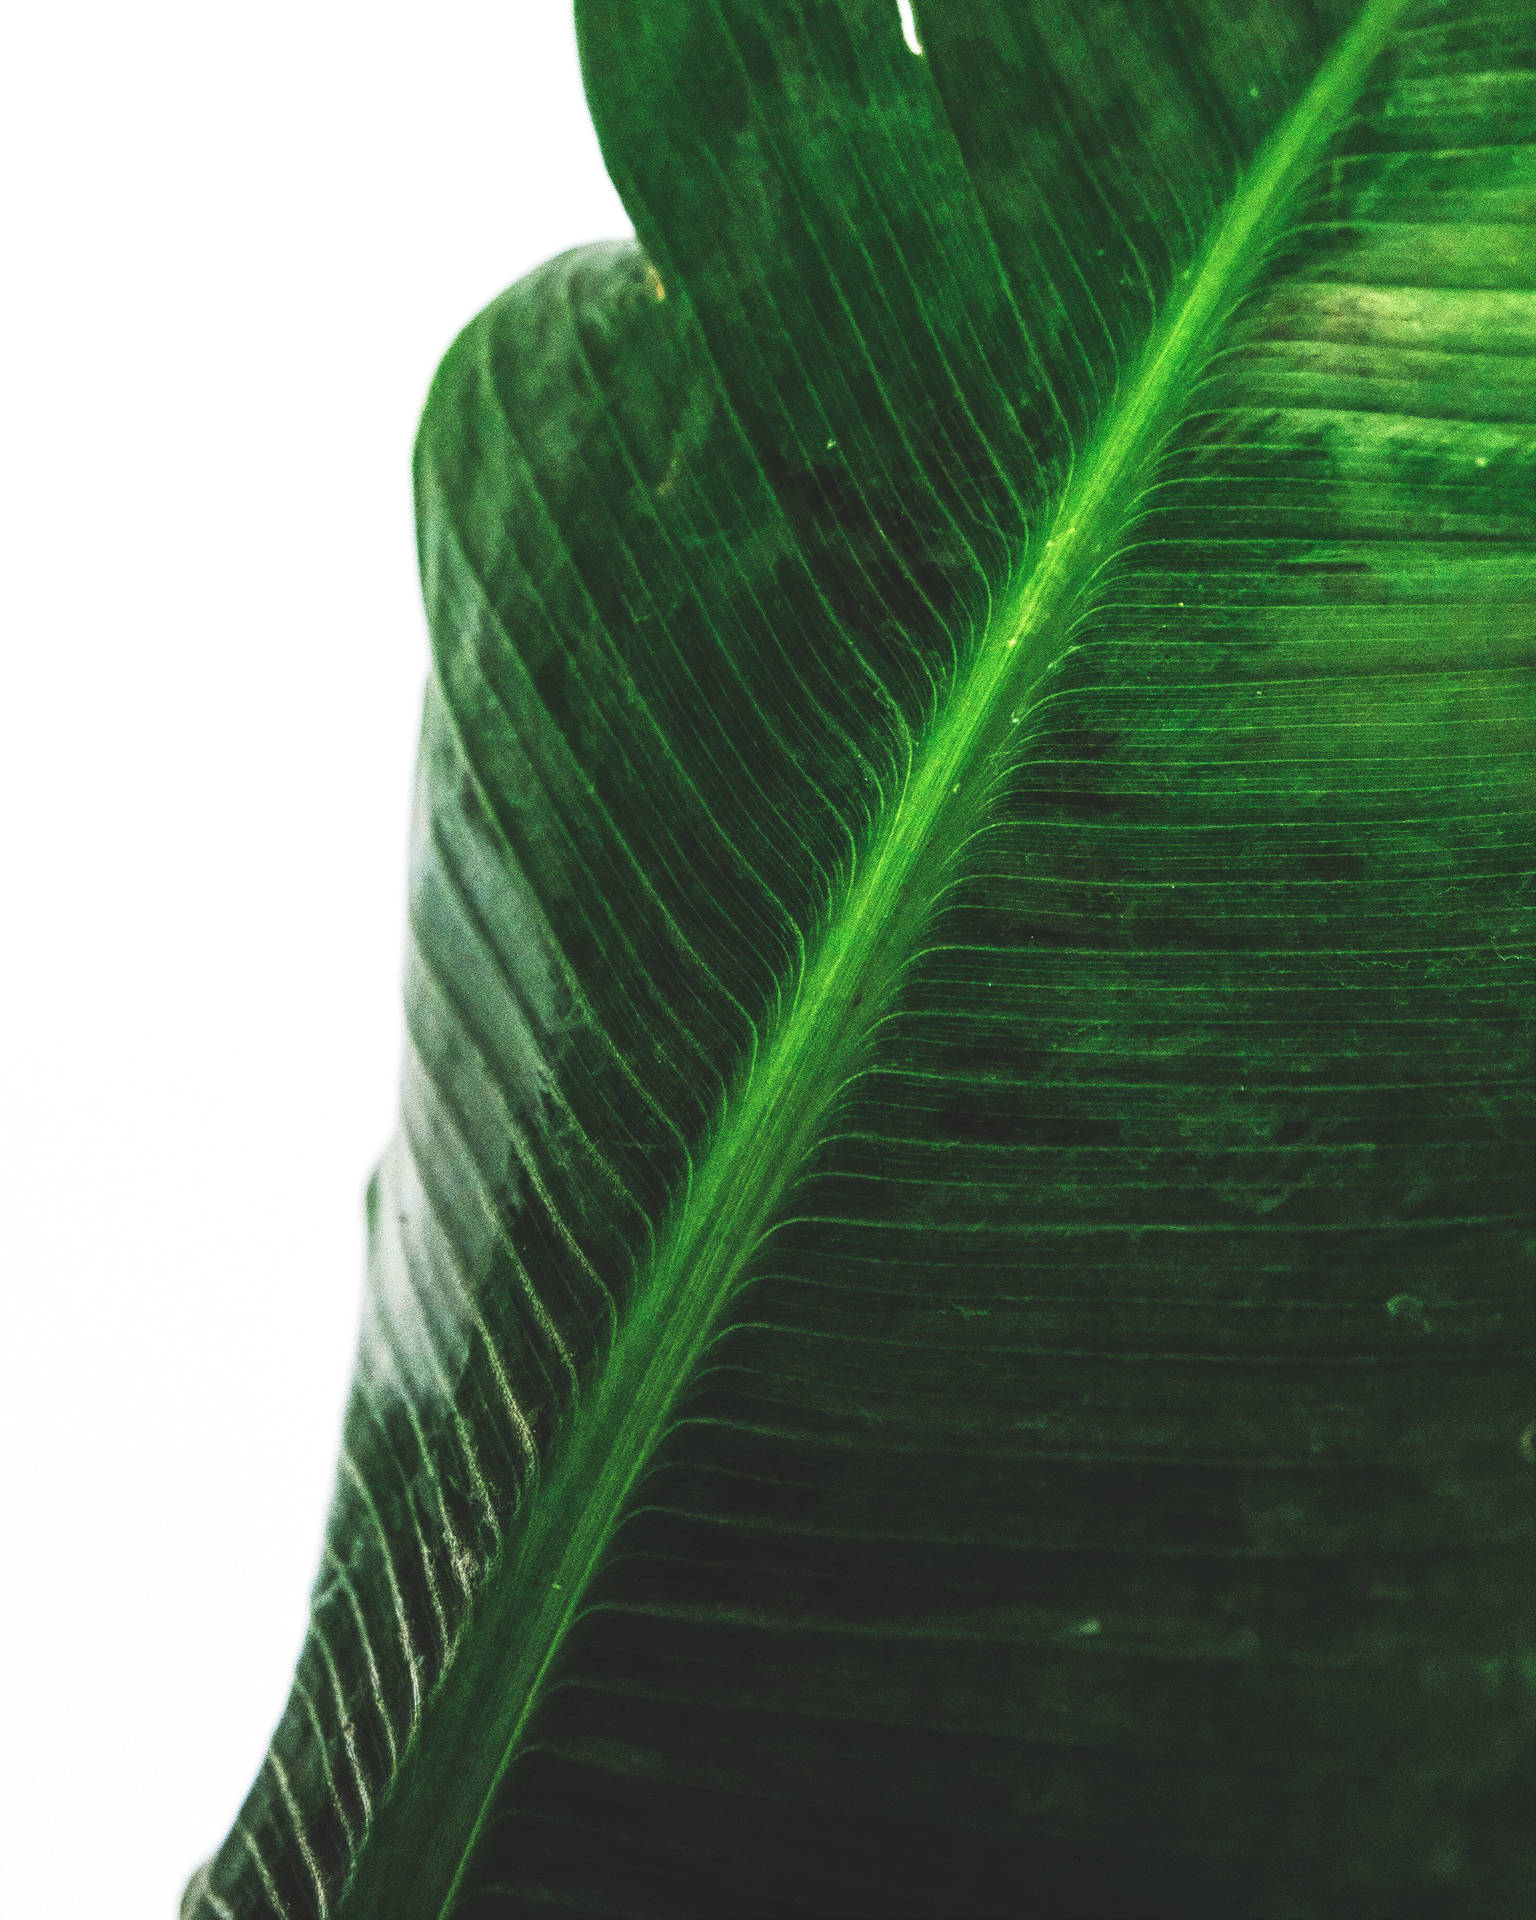 Banana Leaf 2944X3680 Wallpaper and Background Image